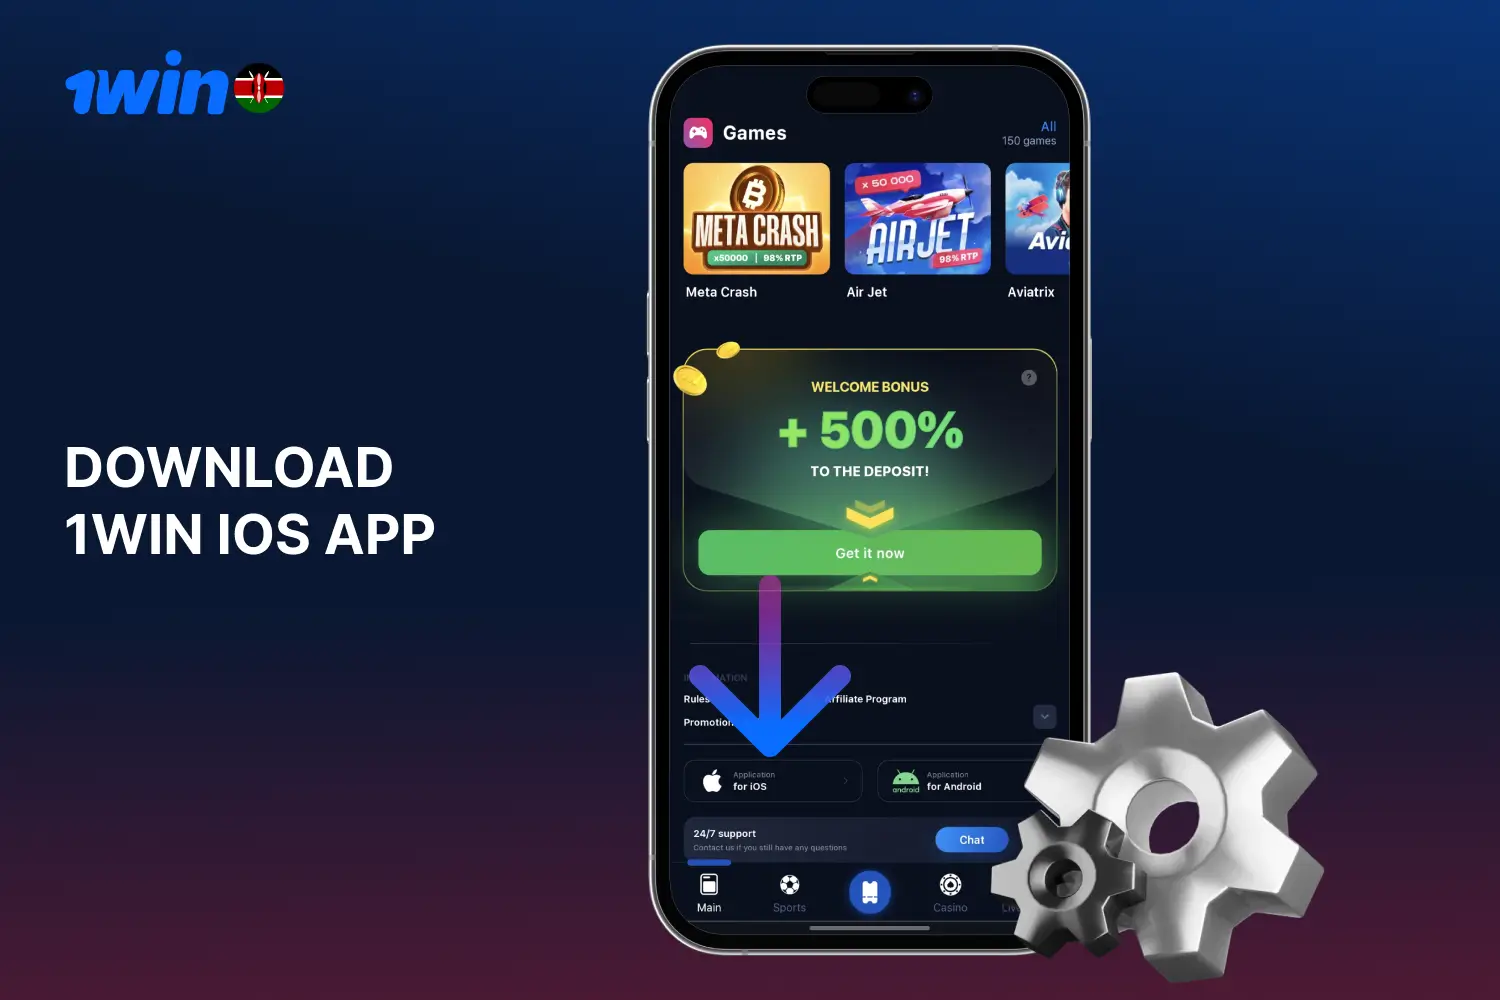 Kenyan bettors with iPhones and iPads need to follow a few simple steps to download the 1win mobile app for their devices